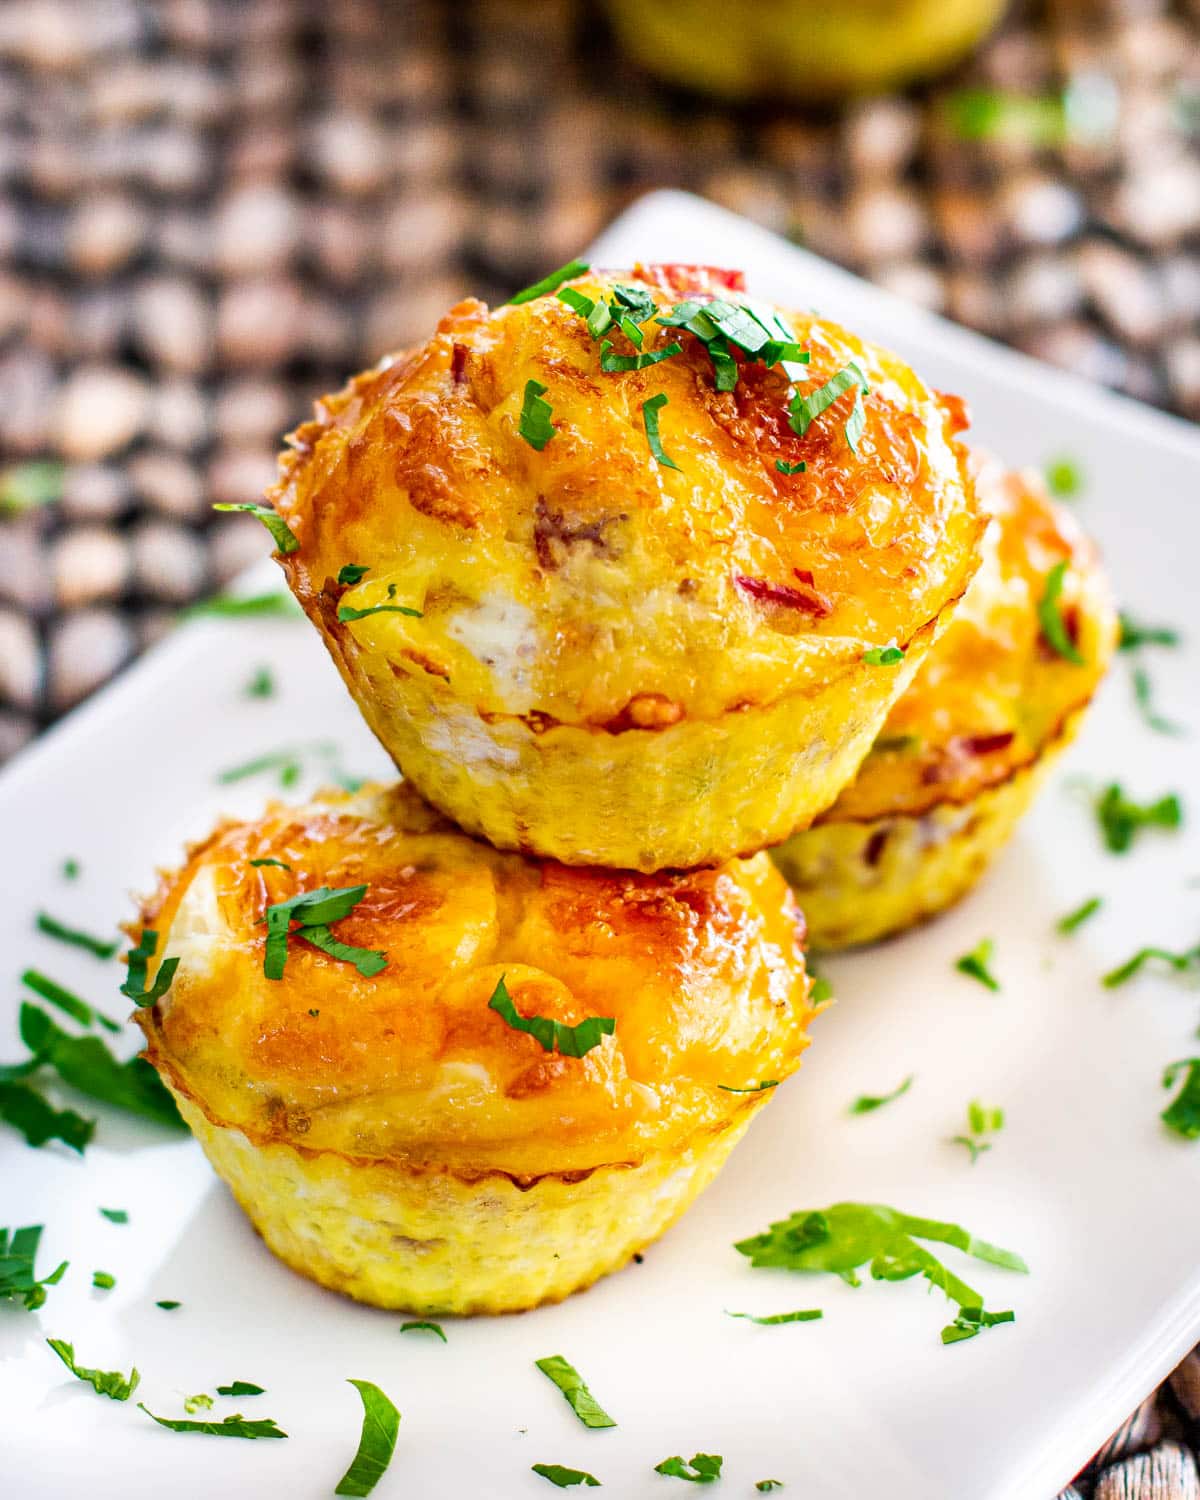 3 egg muffins on a white plate garnished with parsley